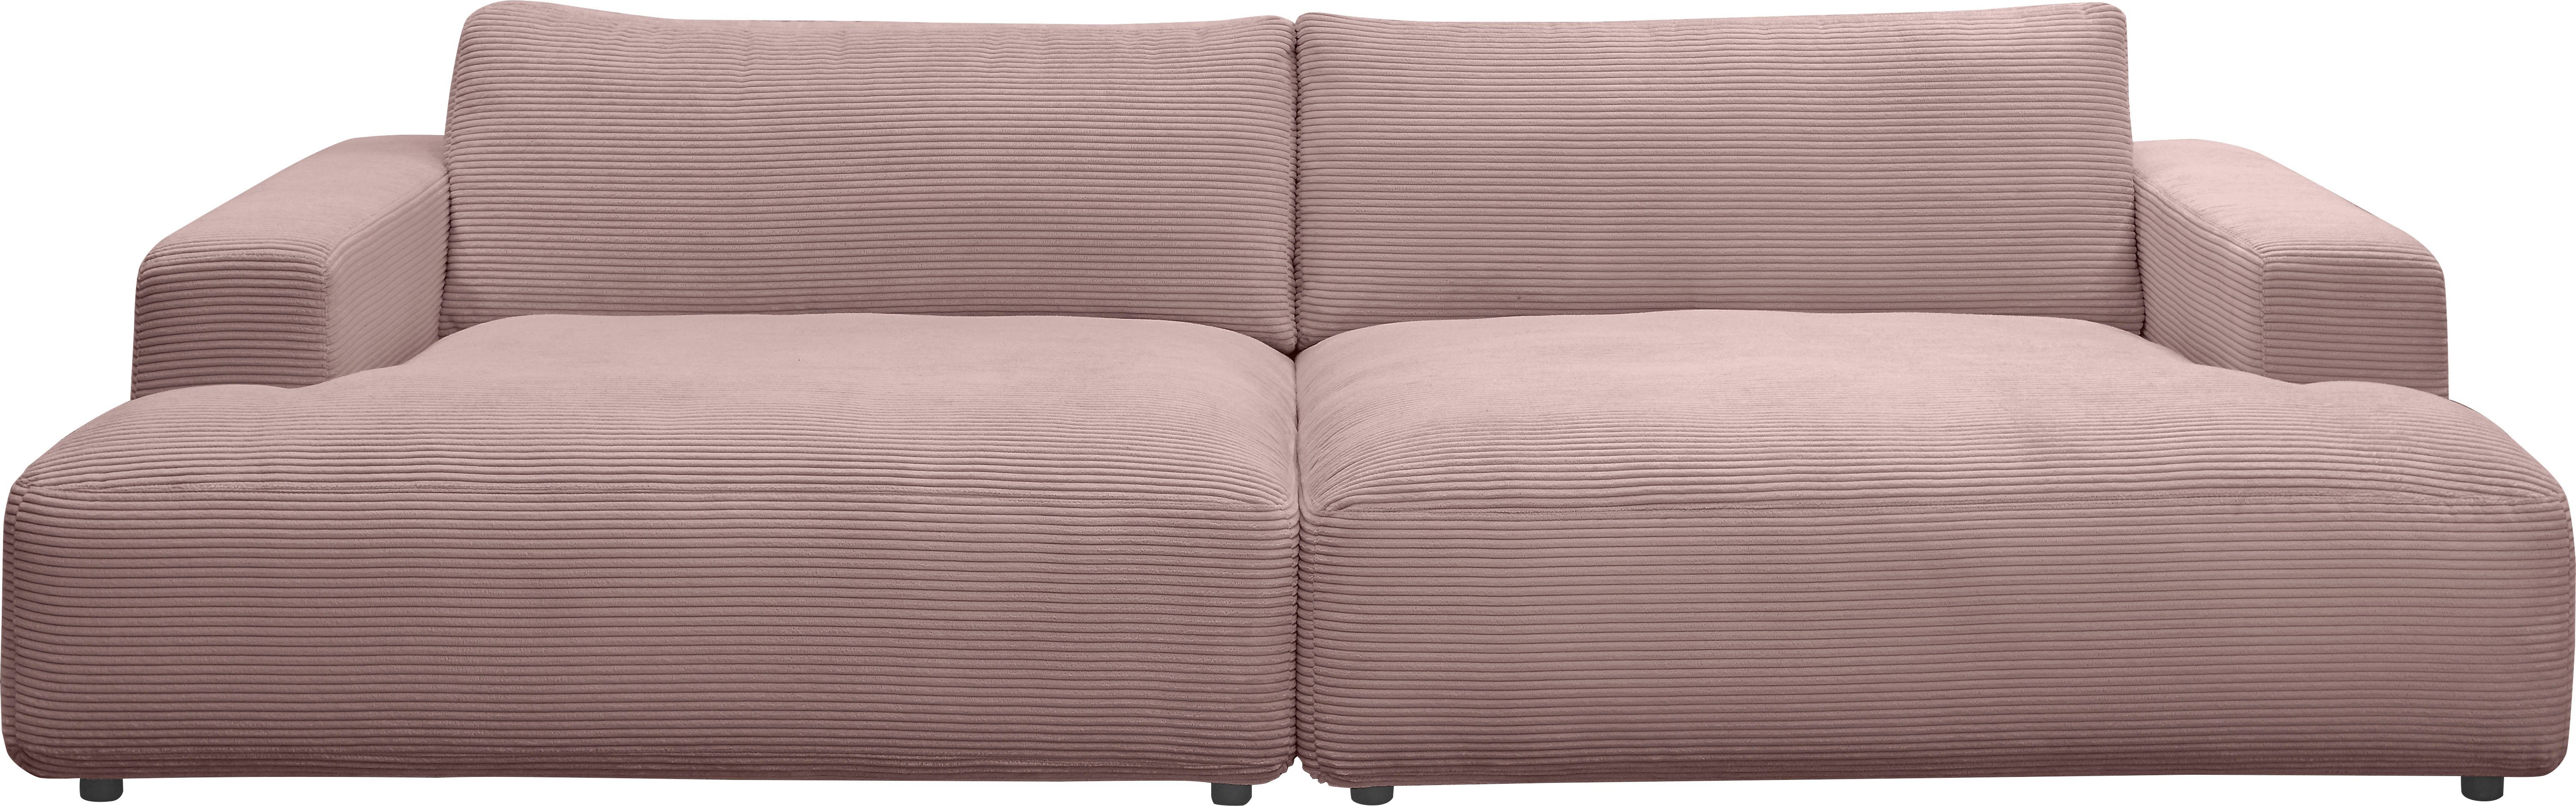 GALLERY M branded by Musterring Loungesofa Lucia, Cord-Bezug, Breite 292 cm rosa | Alle Sofas